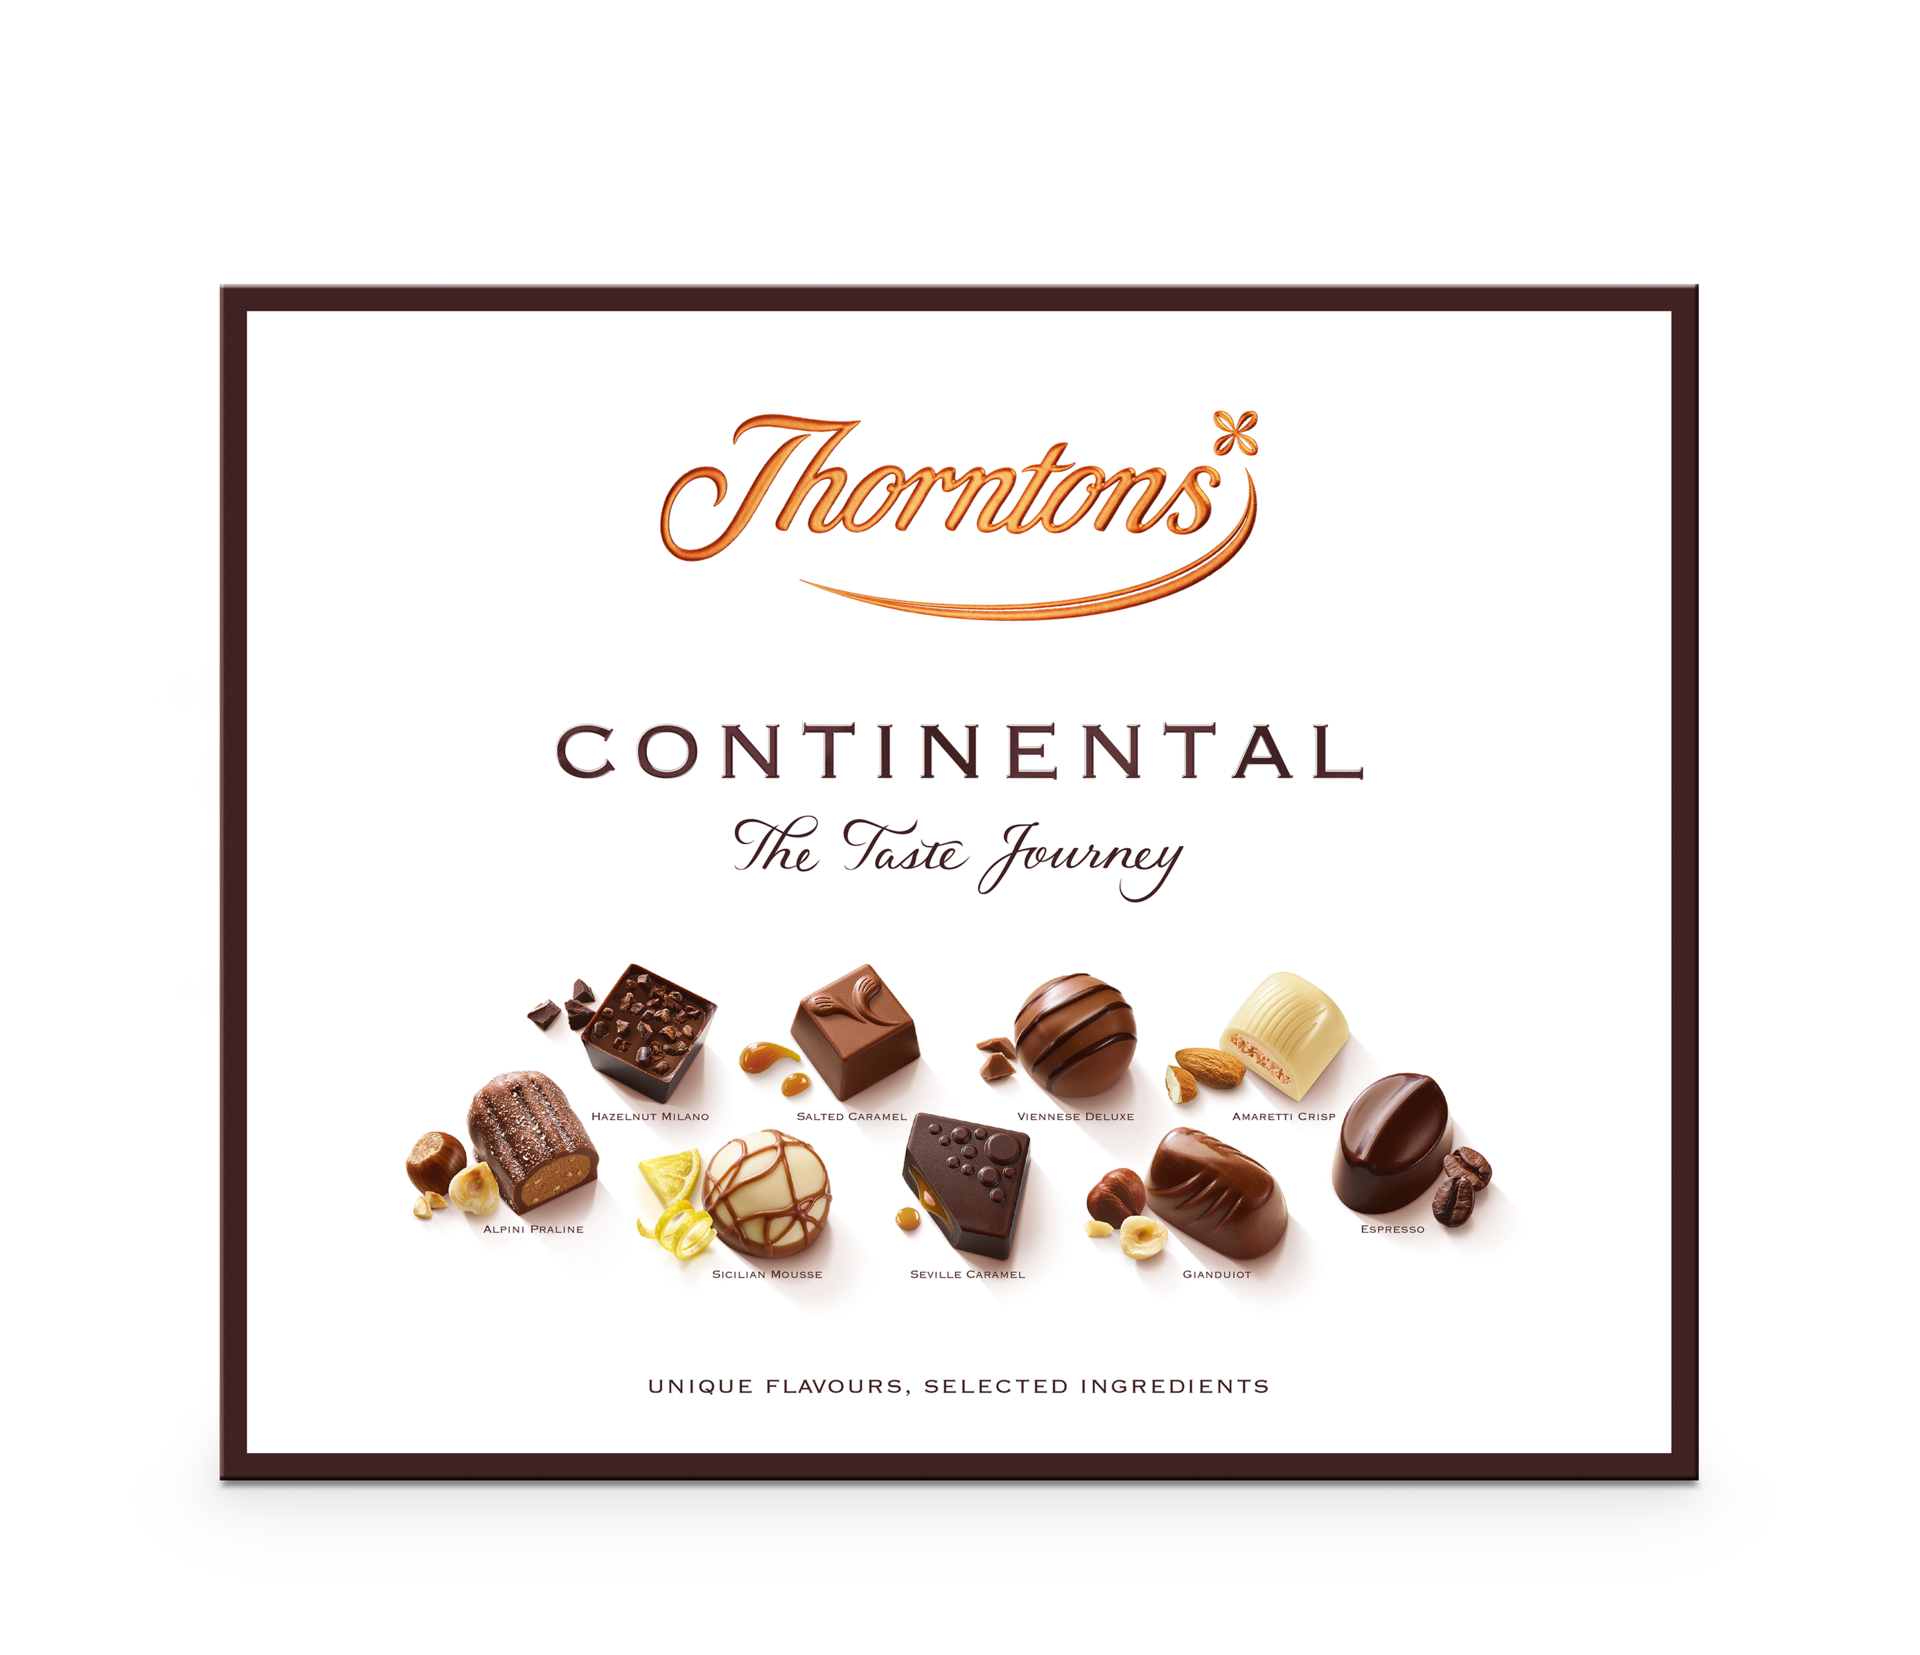 https://www.thorntons.com/medias/sys_master/images/hf0/h00/8916765507614/77229486_main/77229486-main.png?resize=ProductGridComponent